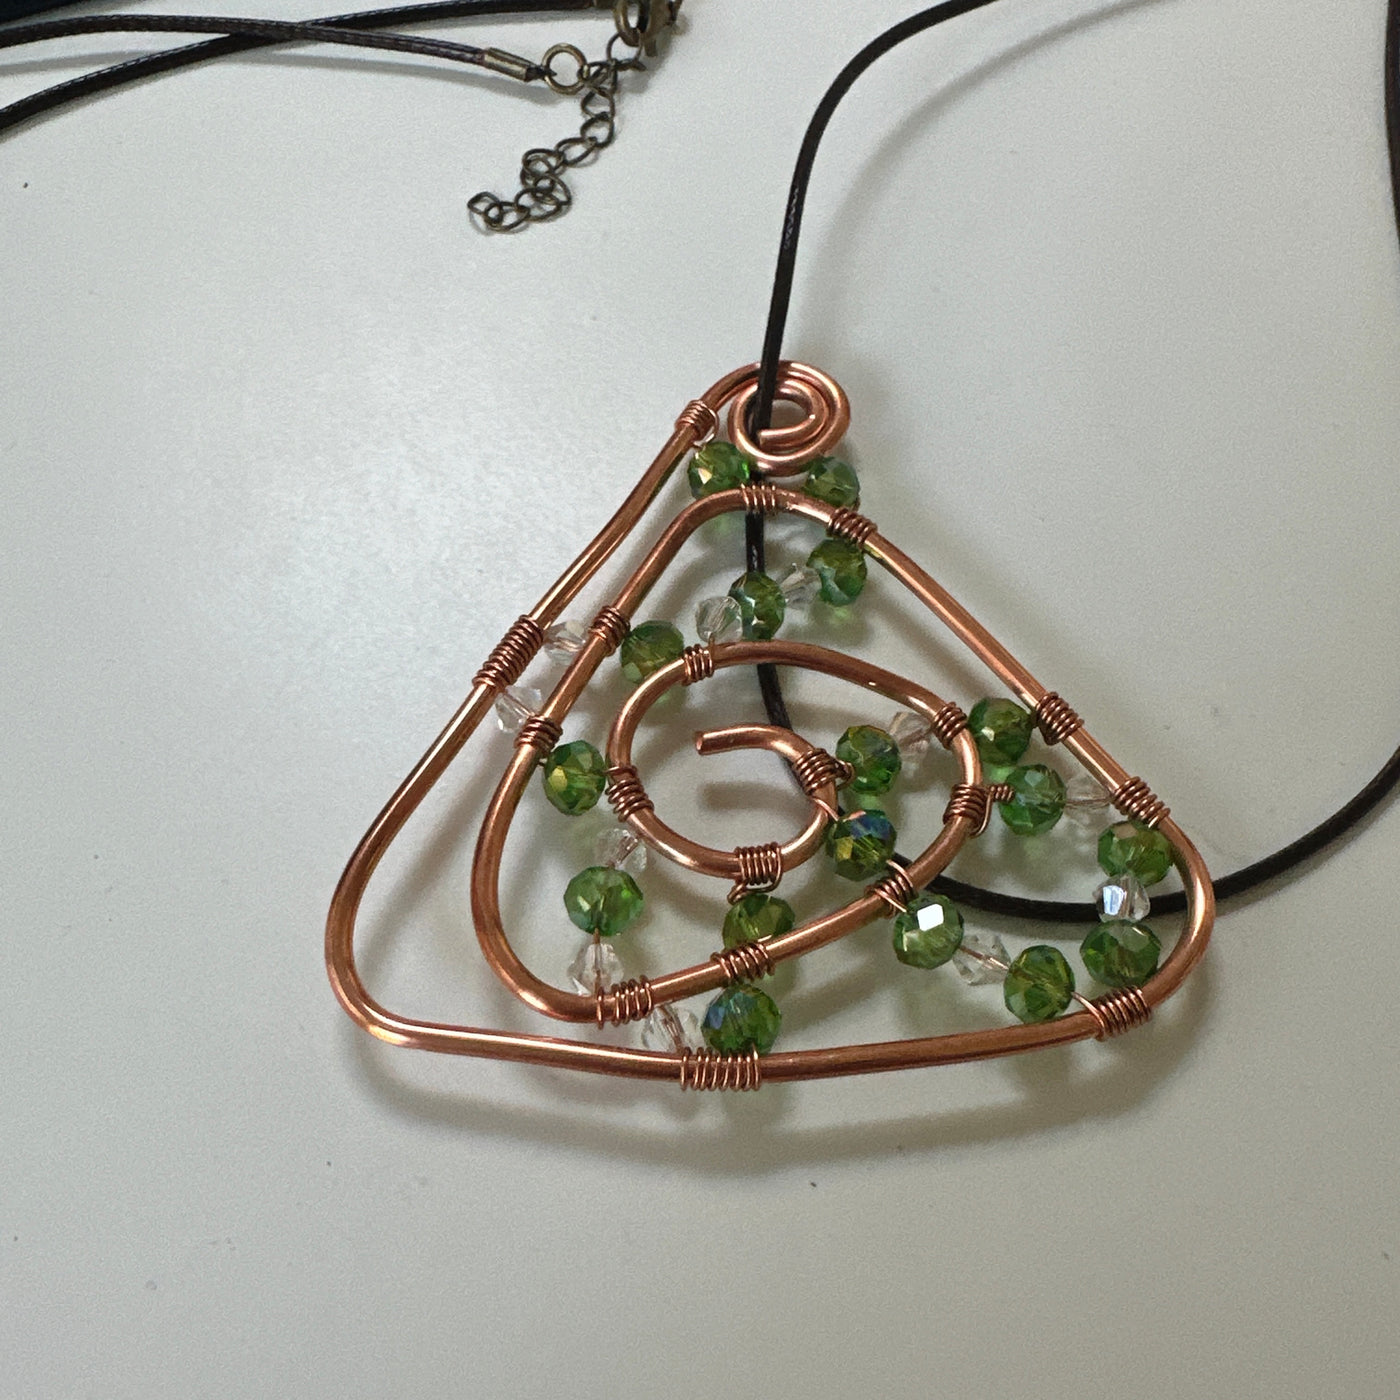 Copper abstract triangle design with green and white chrystals. Leather cord